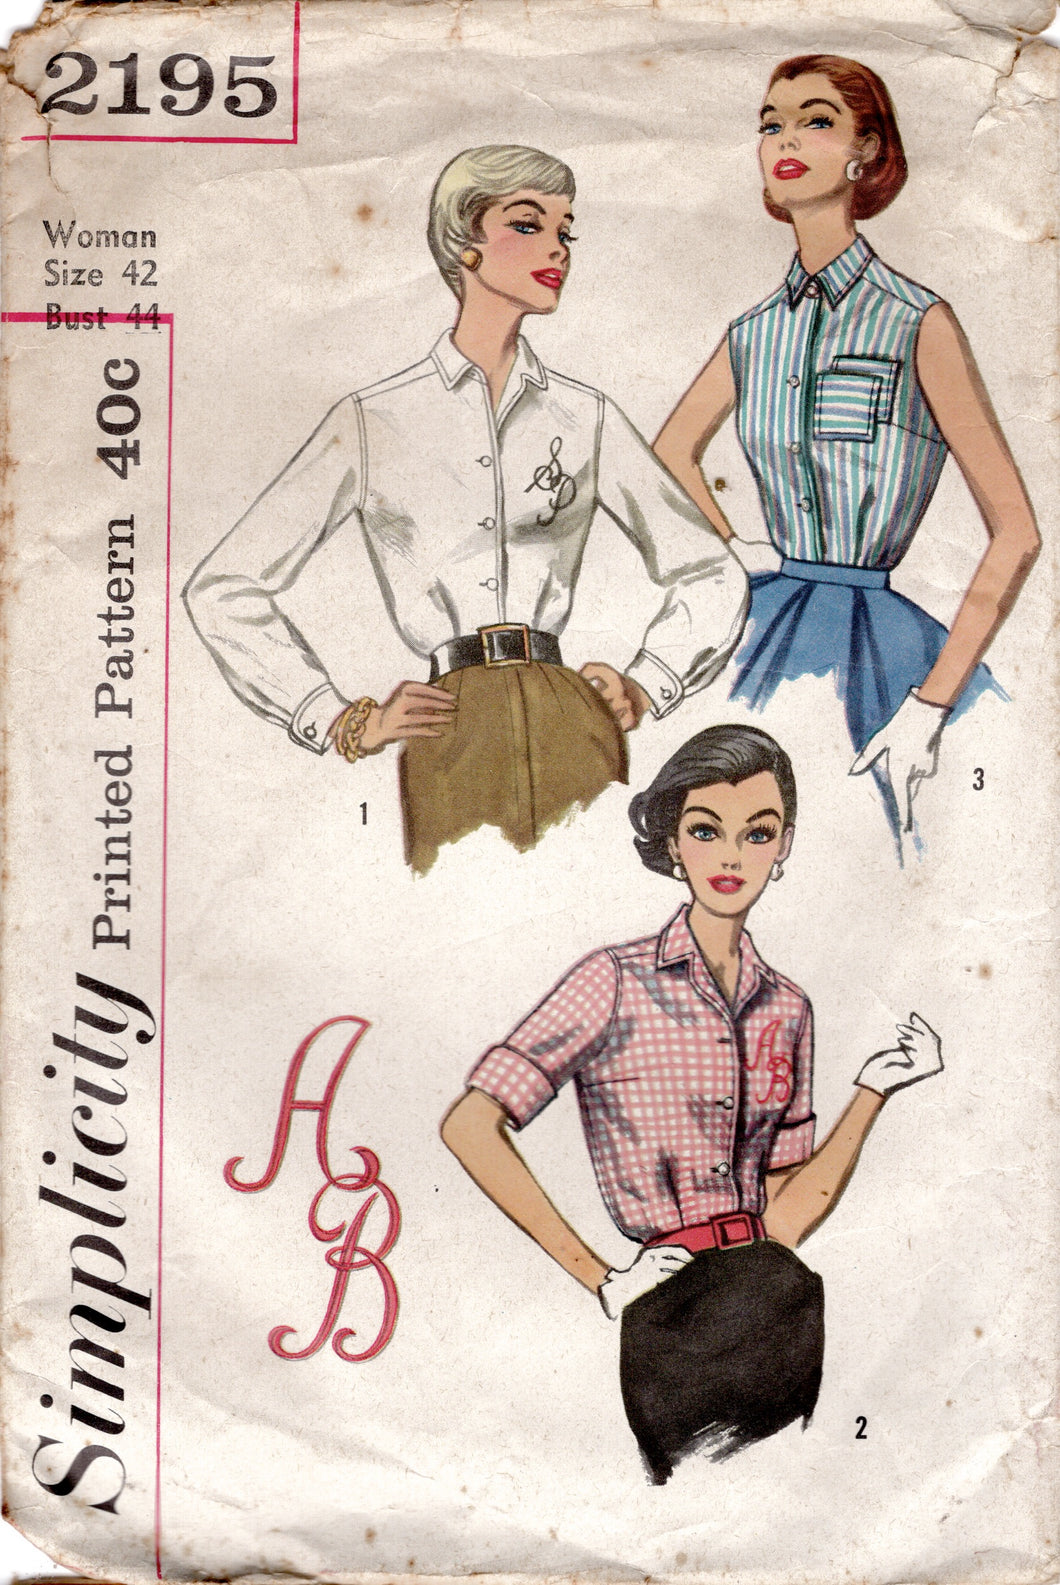 1950's Simplicity Button-Up Shirt Pattern with Double Pockets and Embroidery Transfer - Bust 44